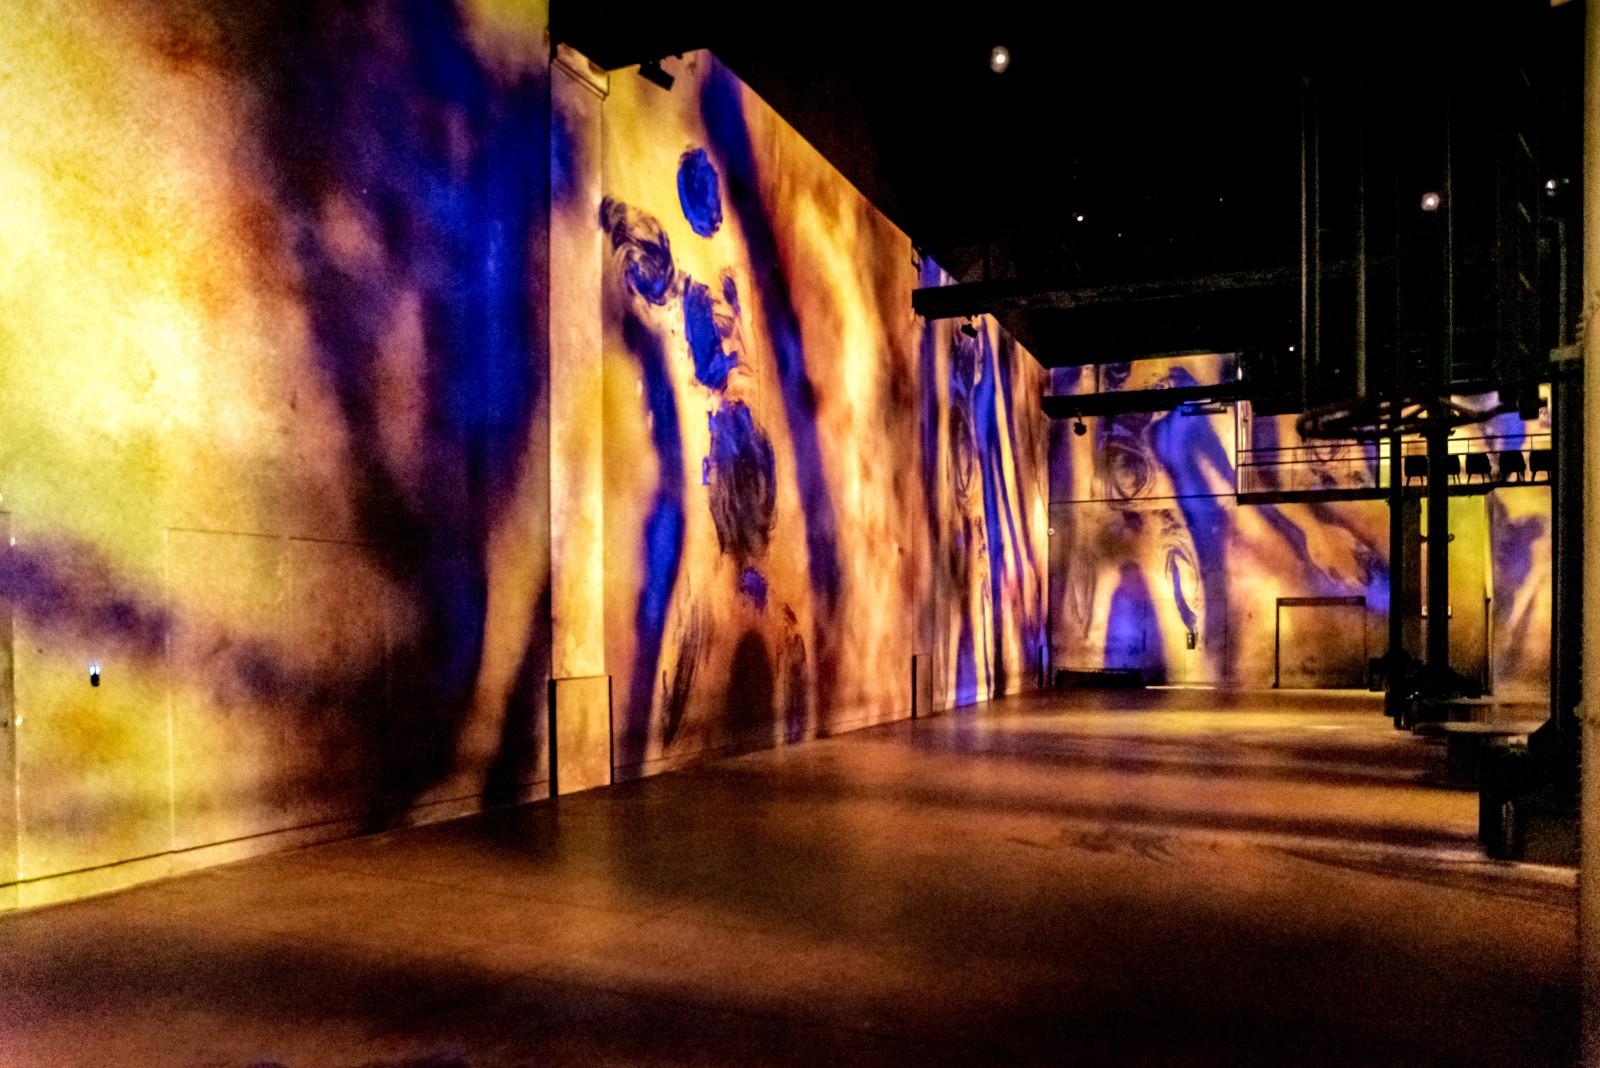 View of the immersive exhibition "Infinite blue"